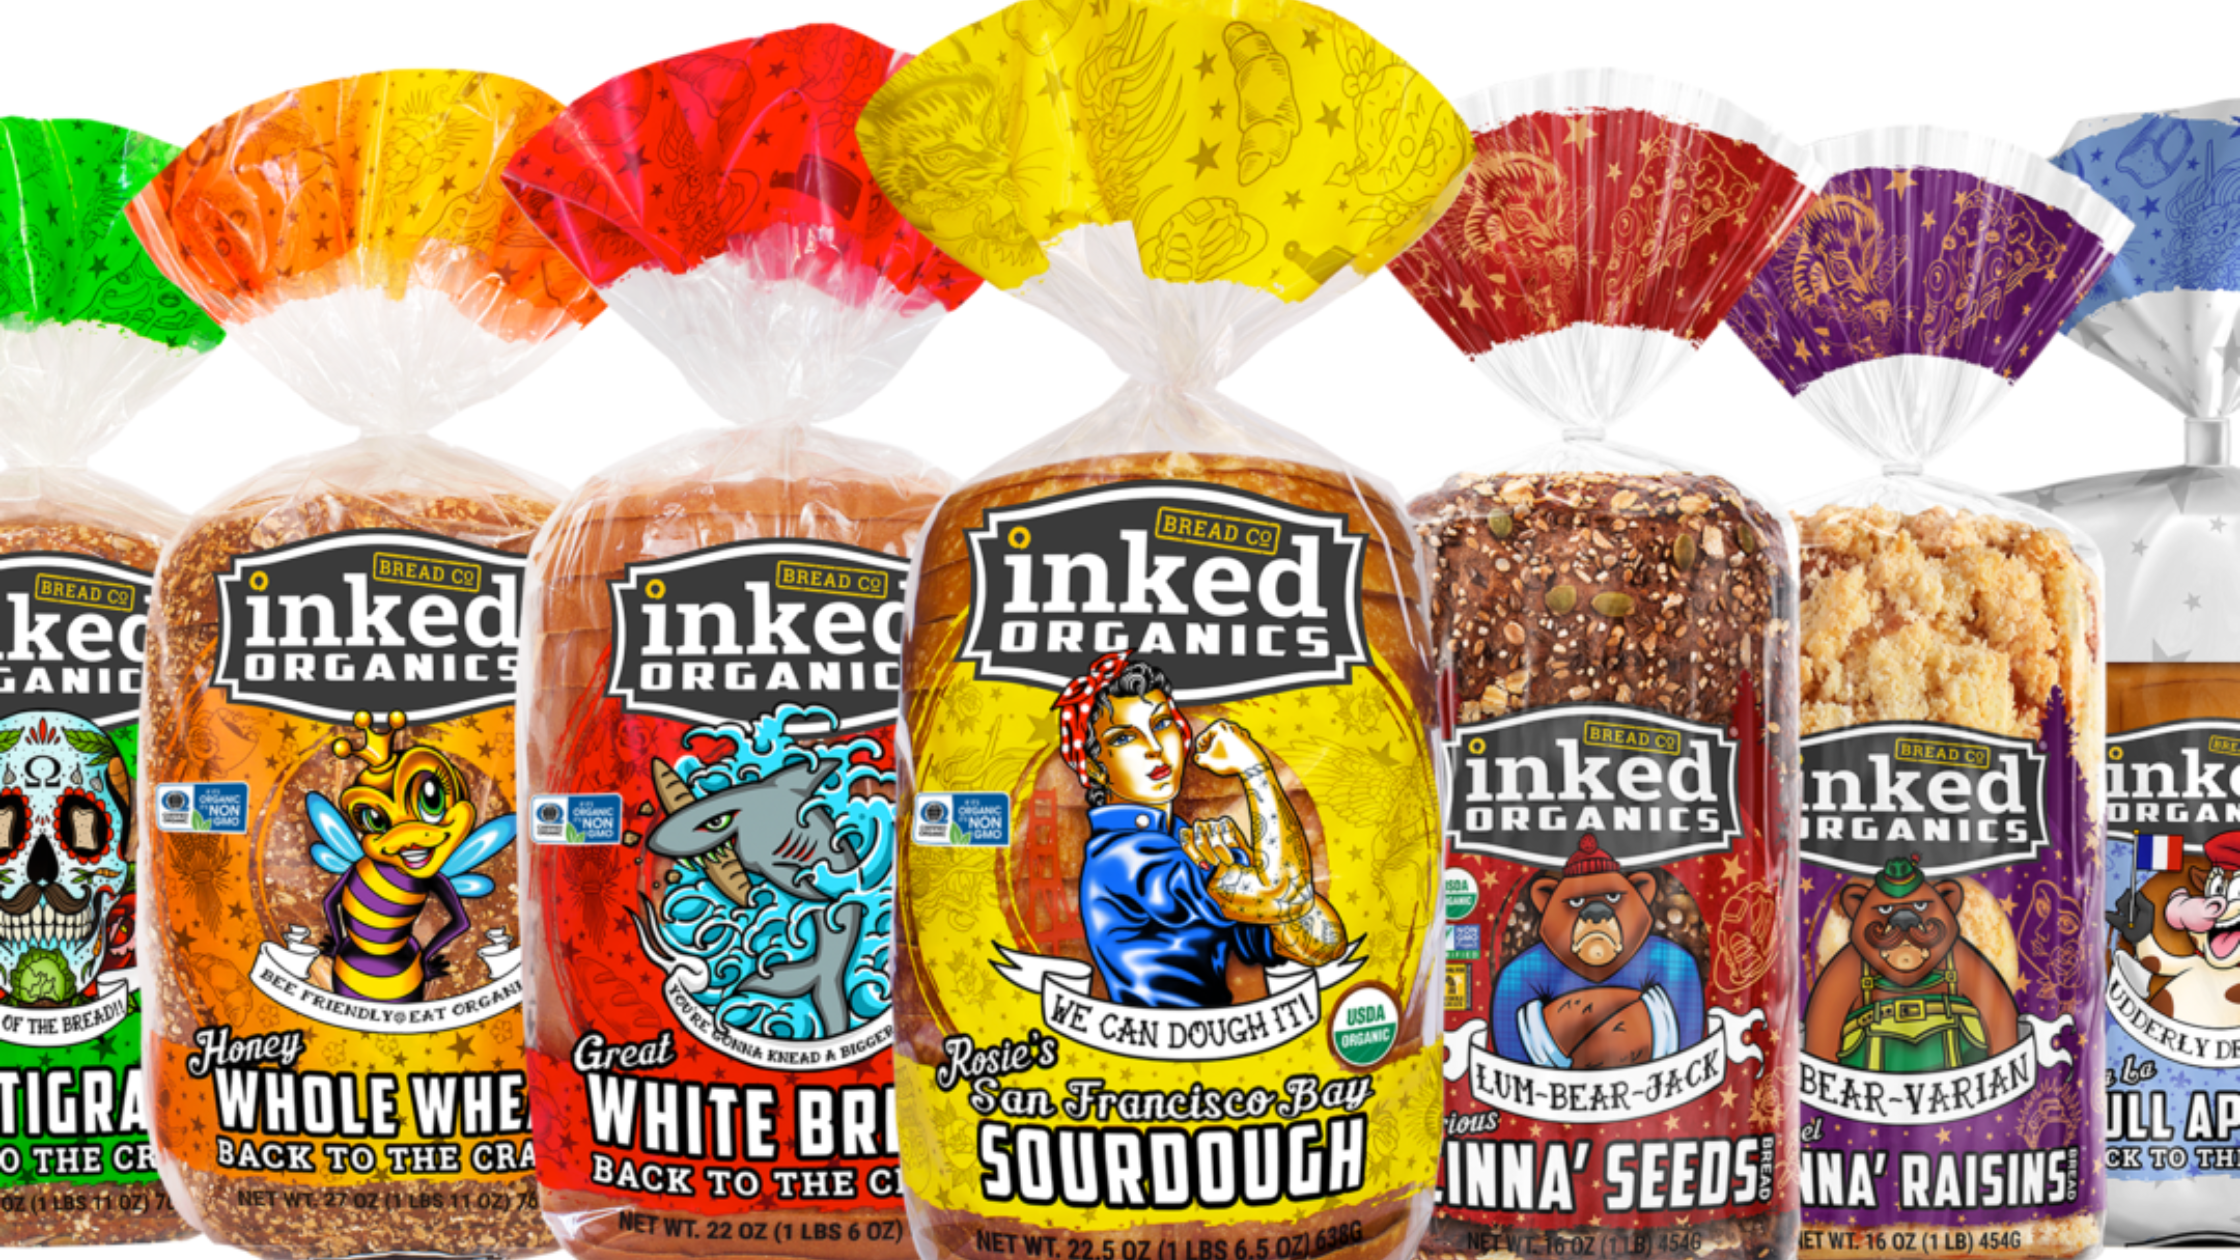 How Inked Bread Co. Keeps it Real